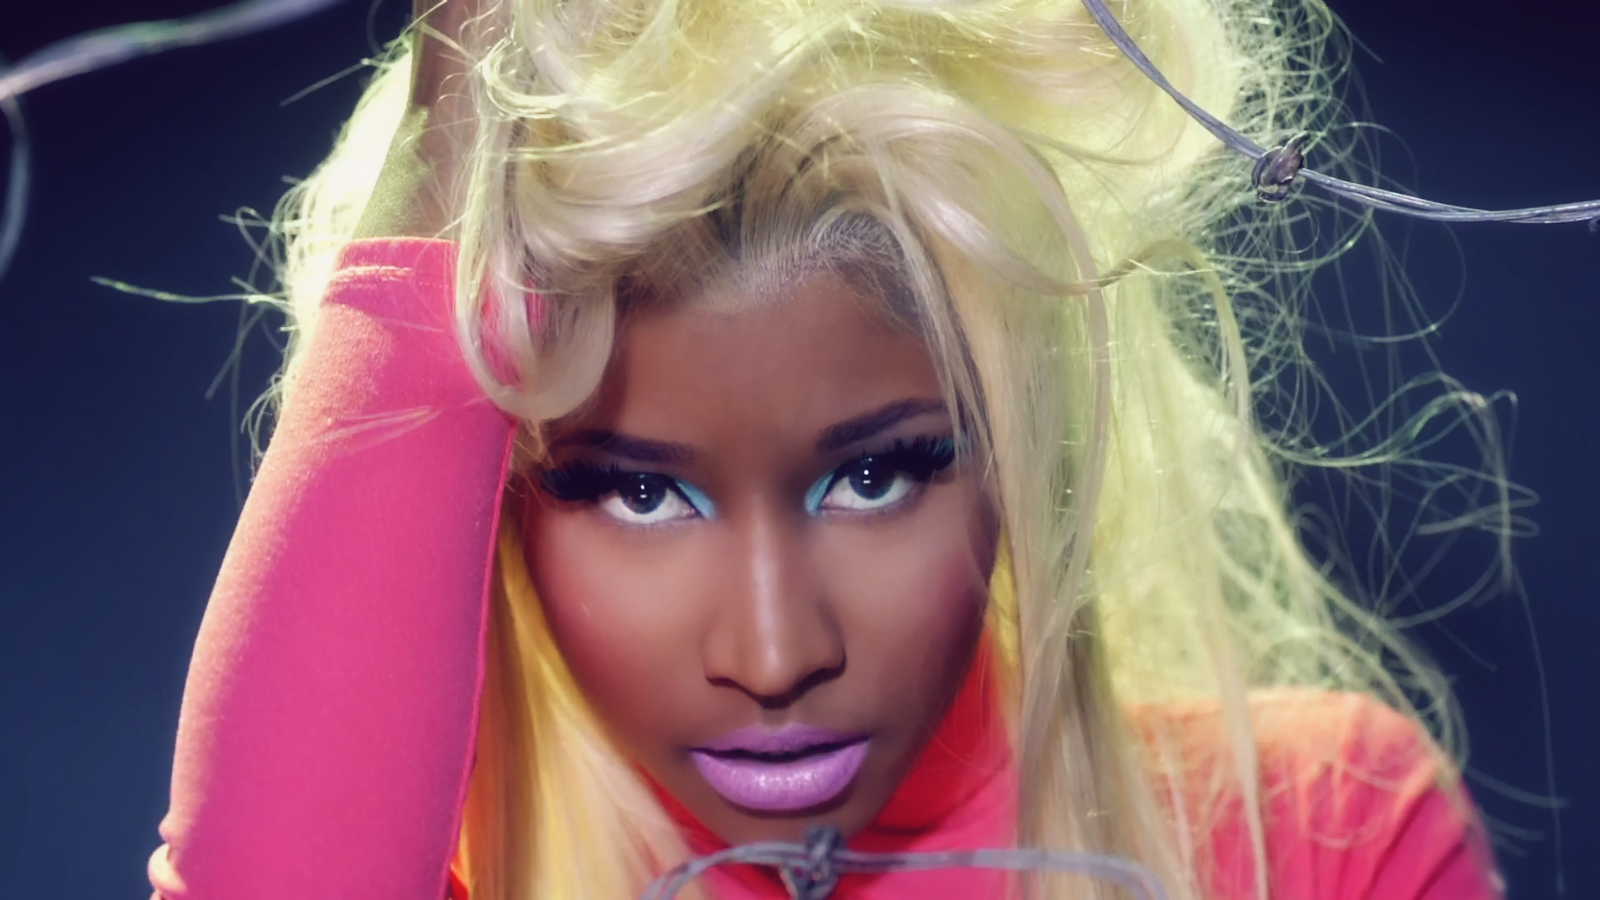 Download Nicki Minaj Look background for your phone iPhone android